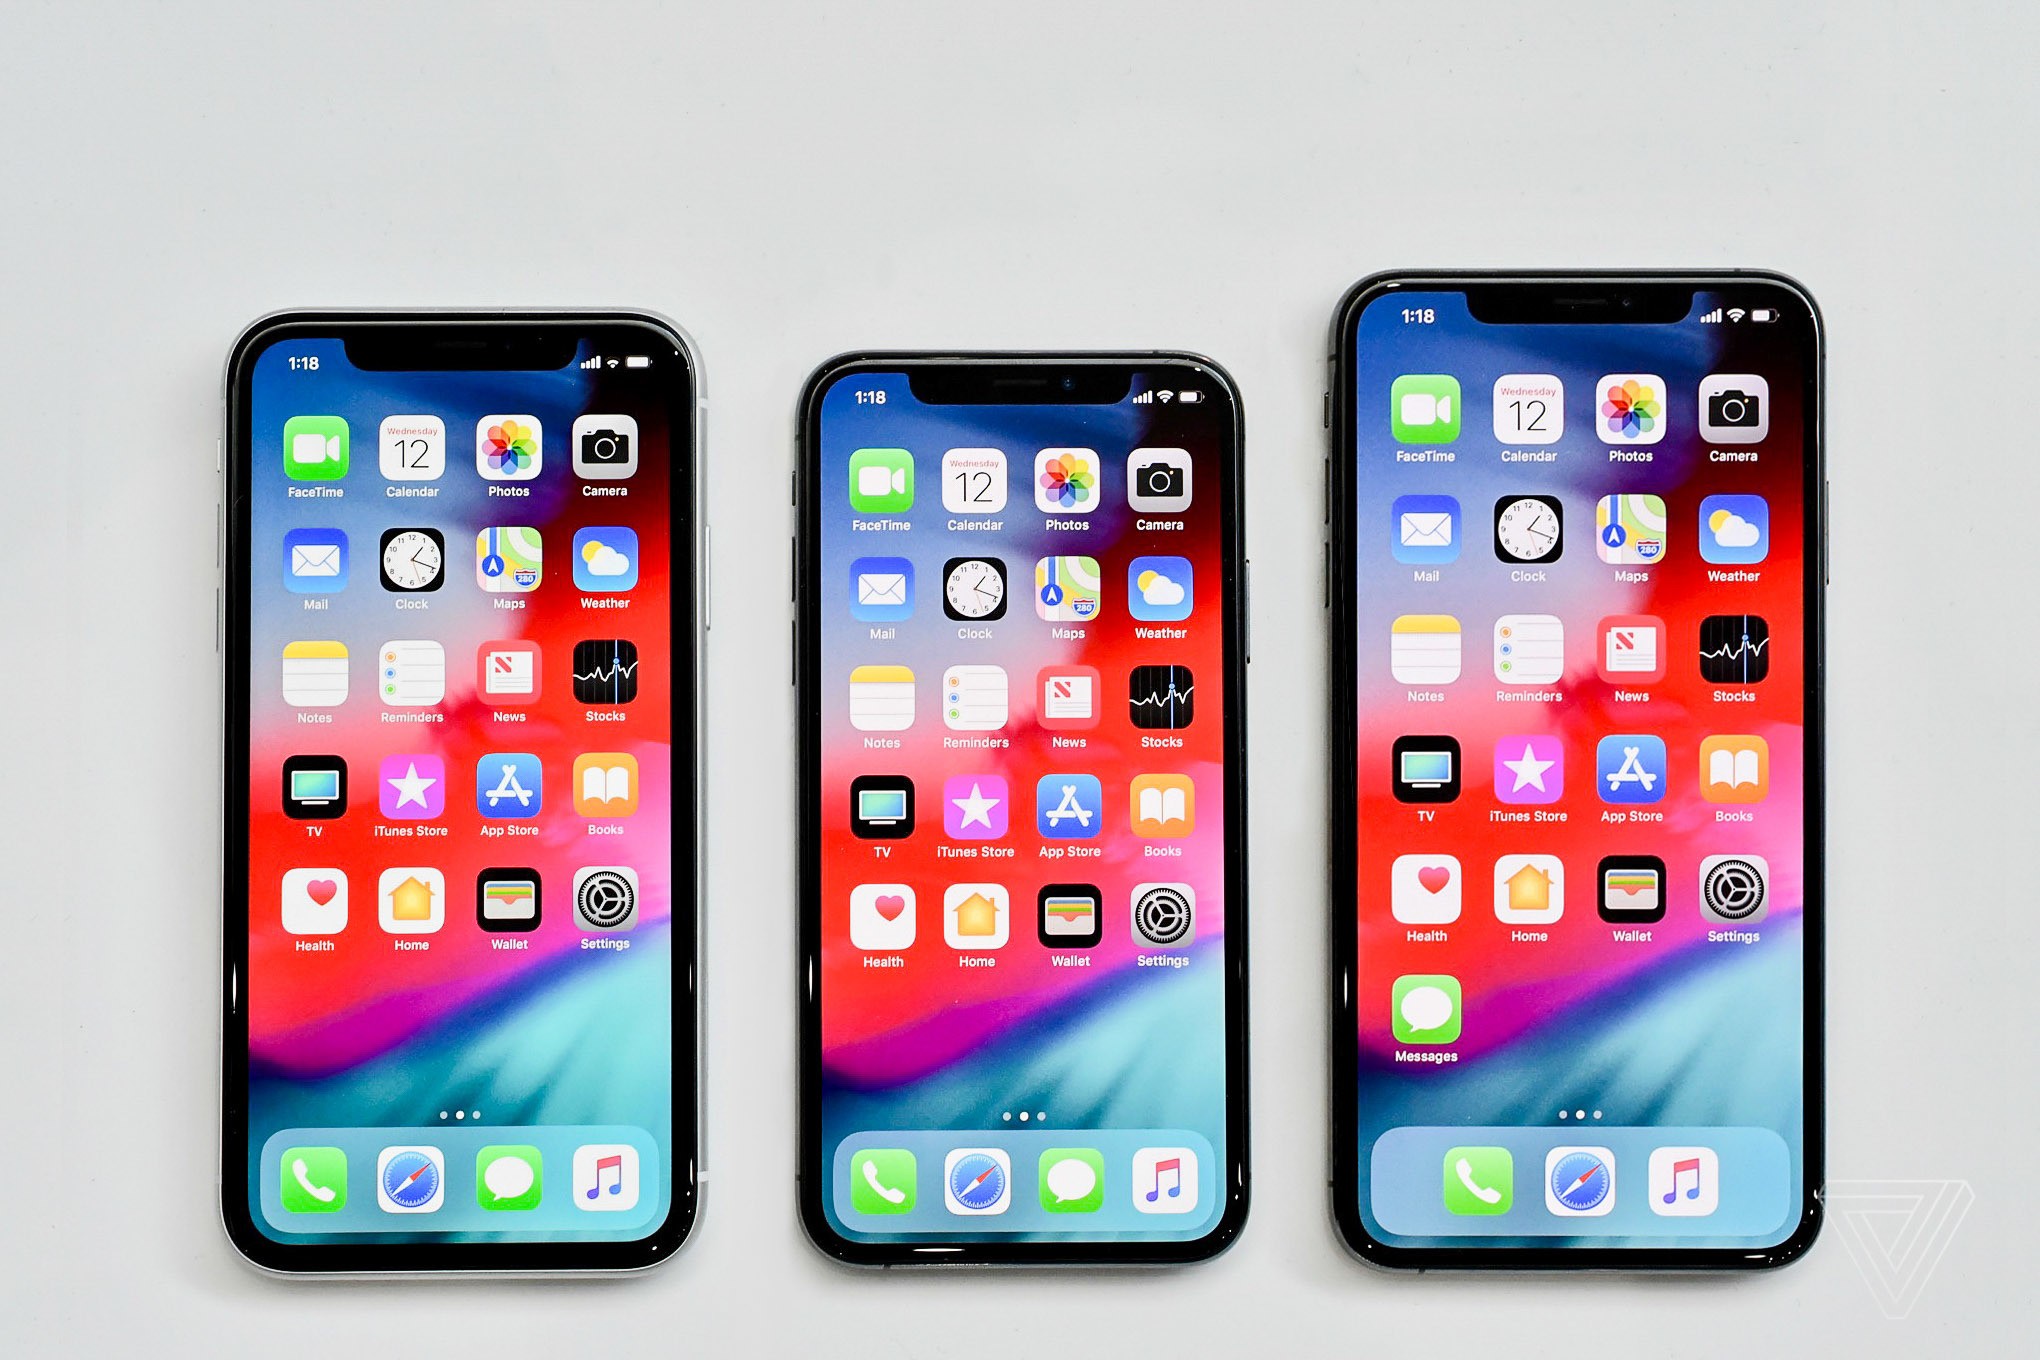 THE VERGE GUIDE TO THE IPHONE